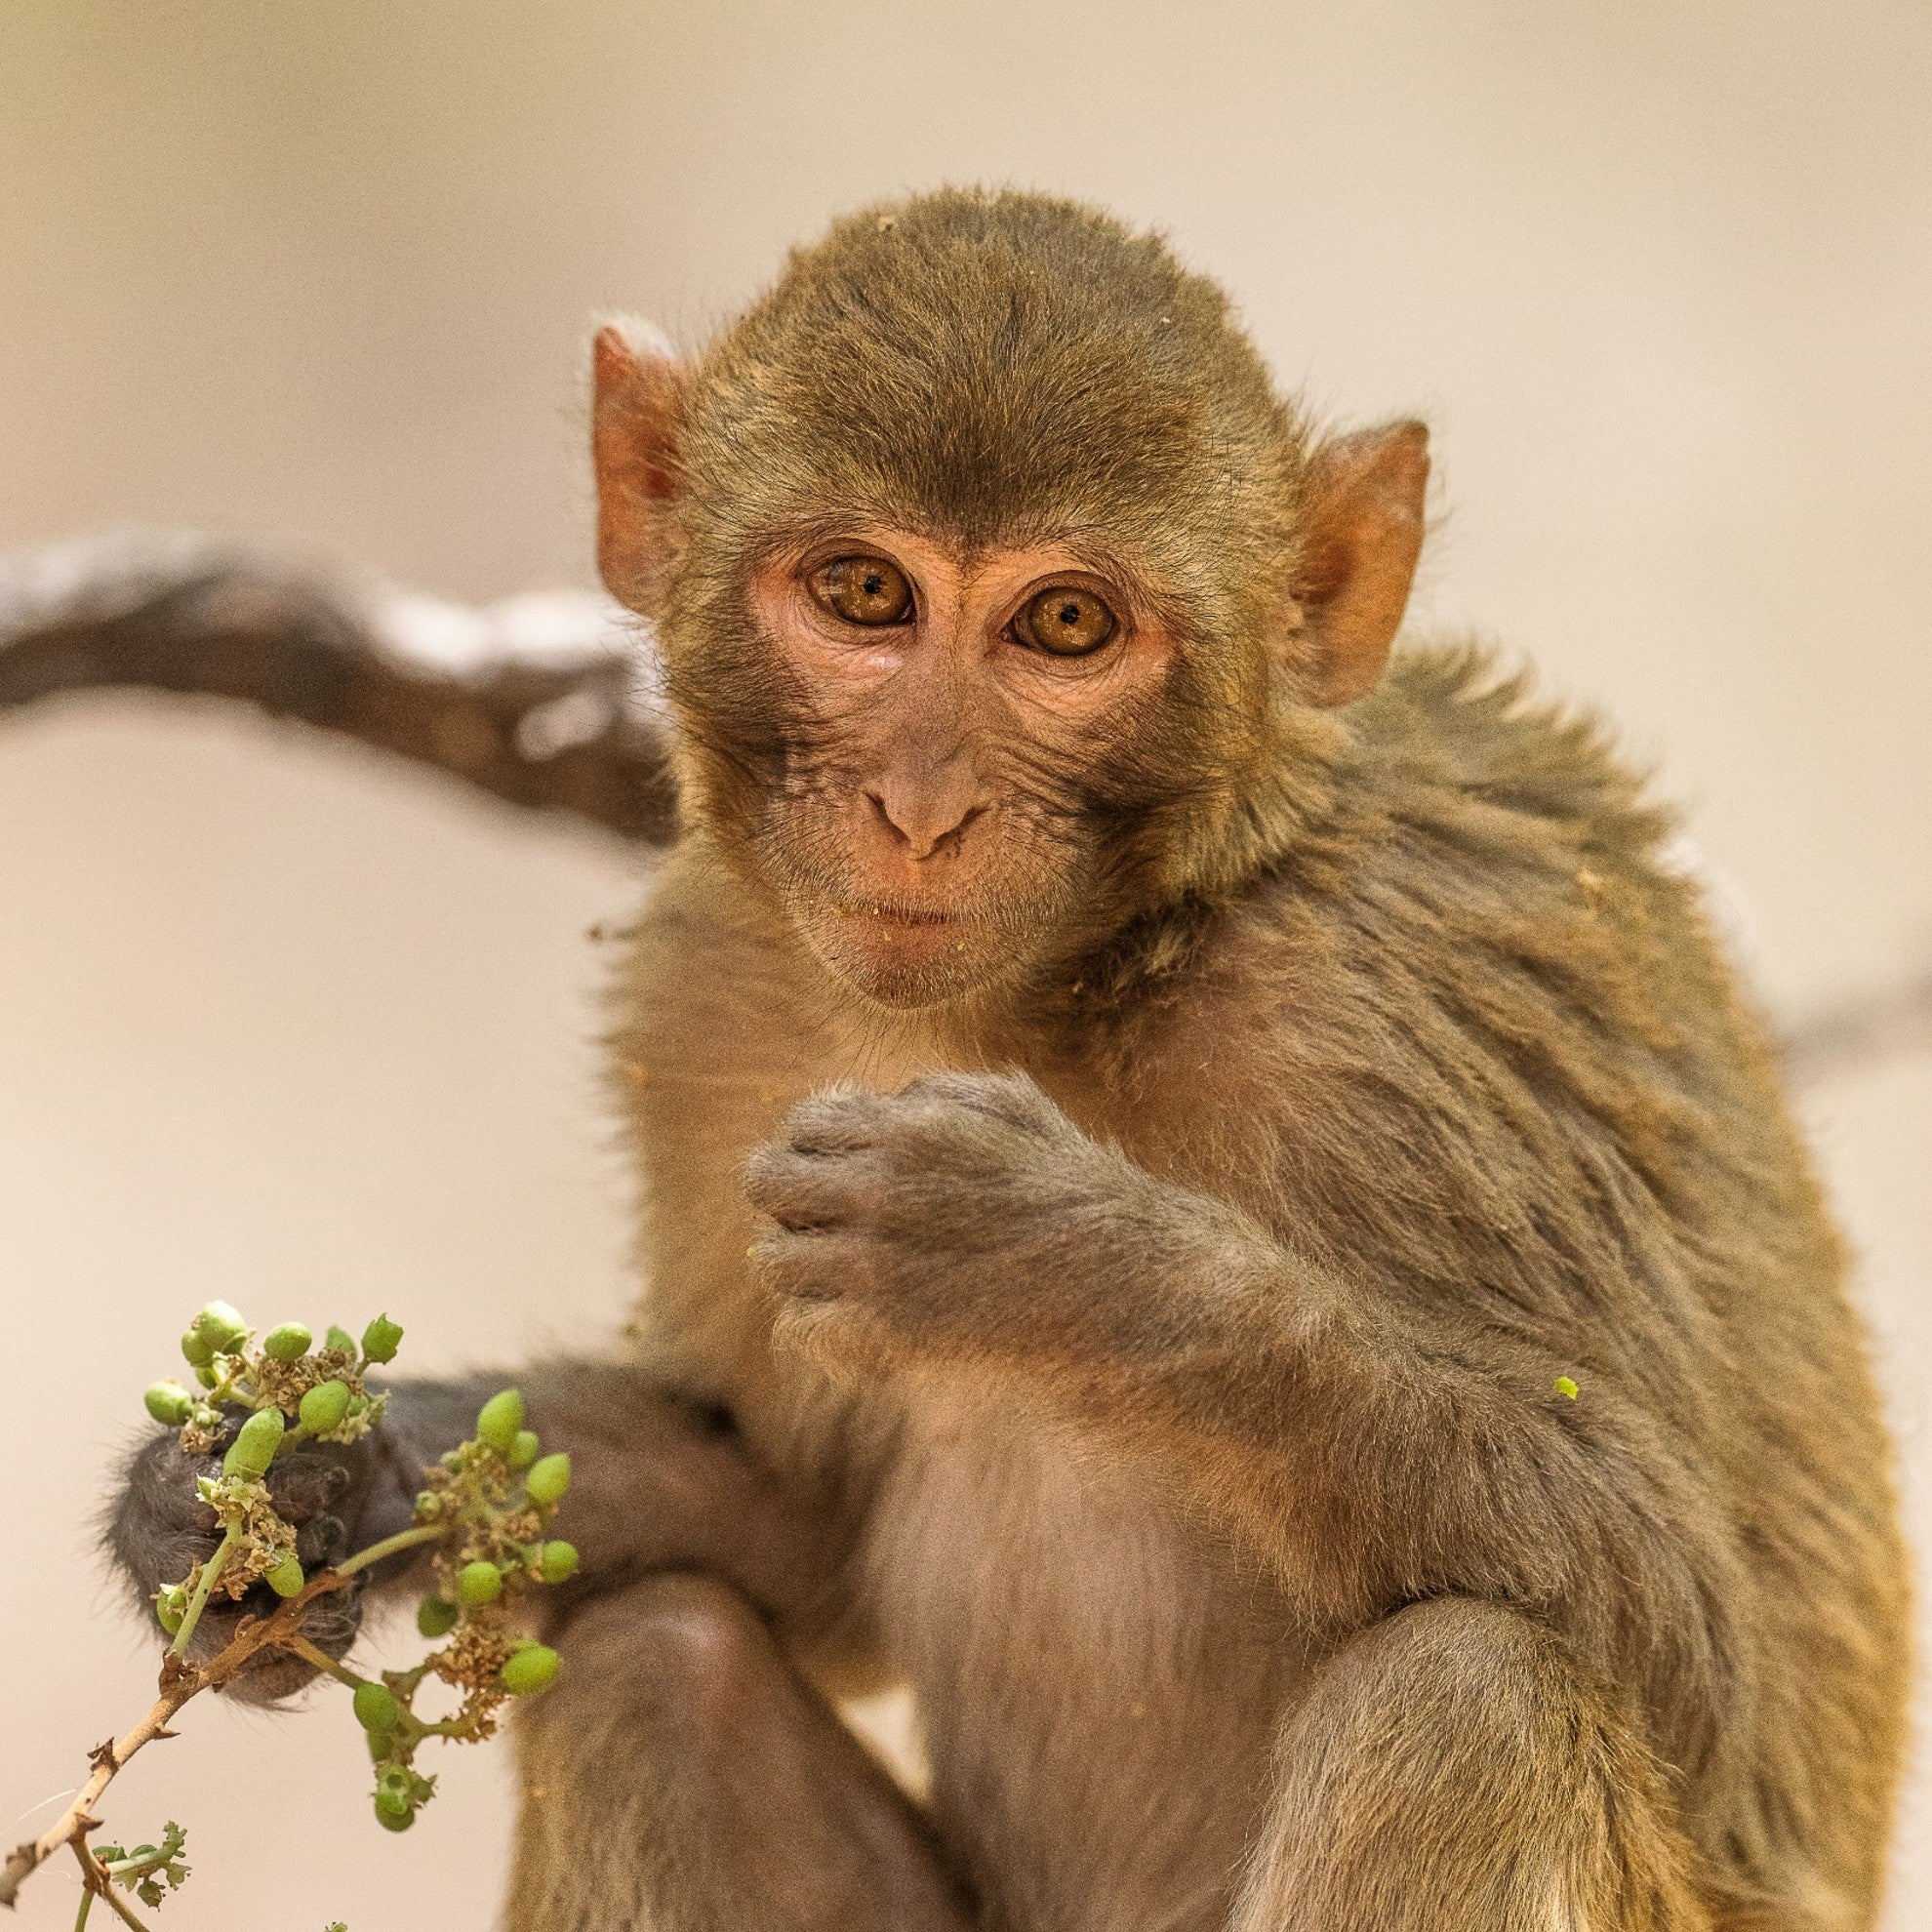 A close-up photo of a rhesus macaque eating a plant